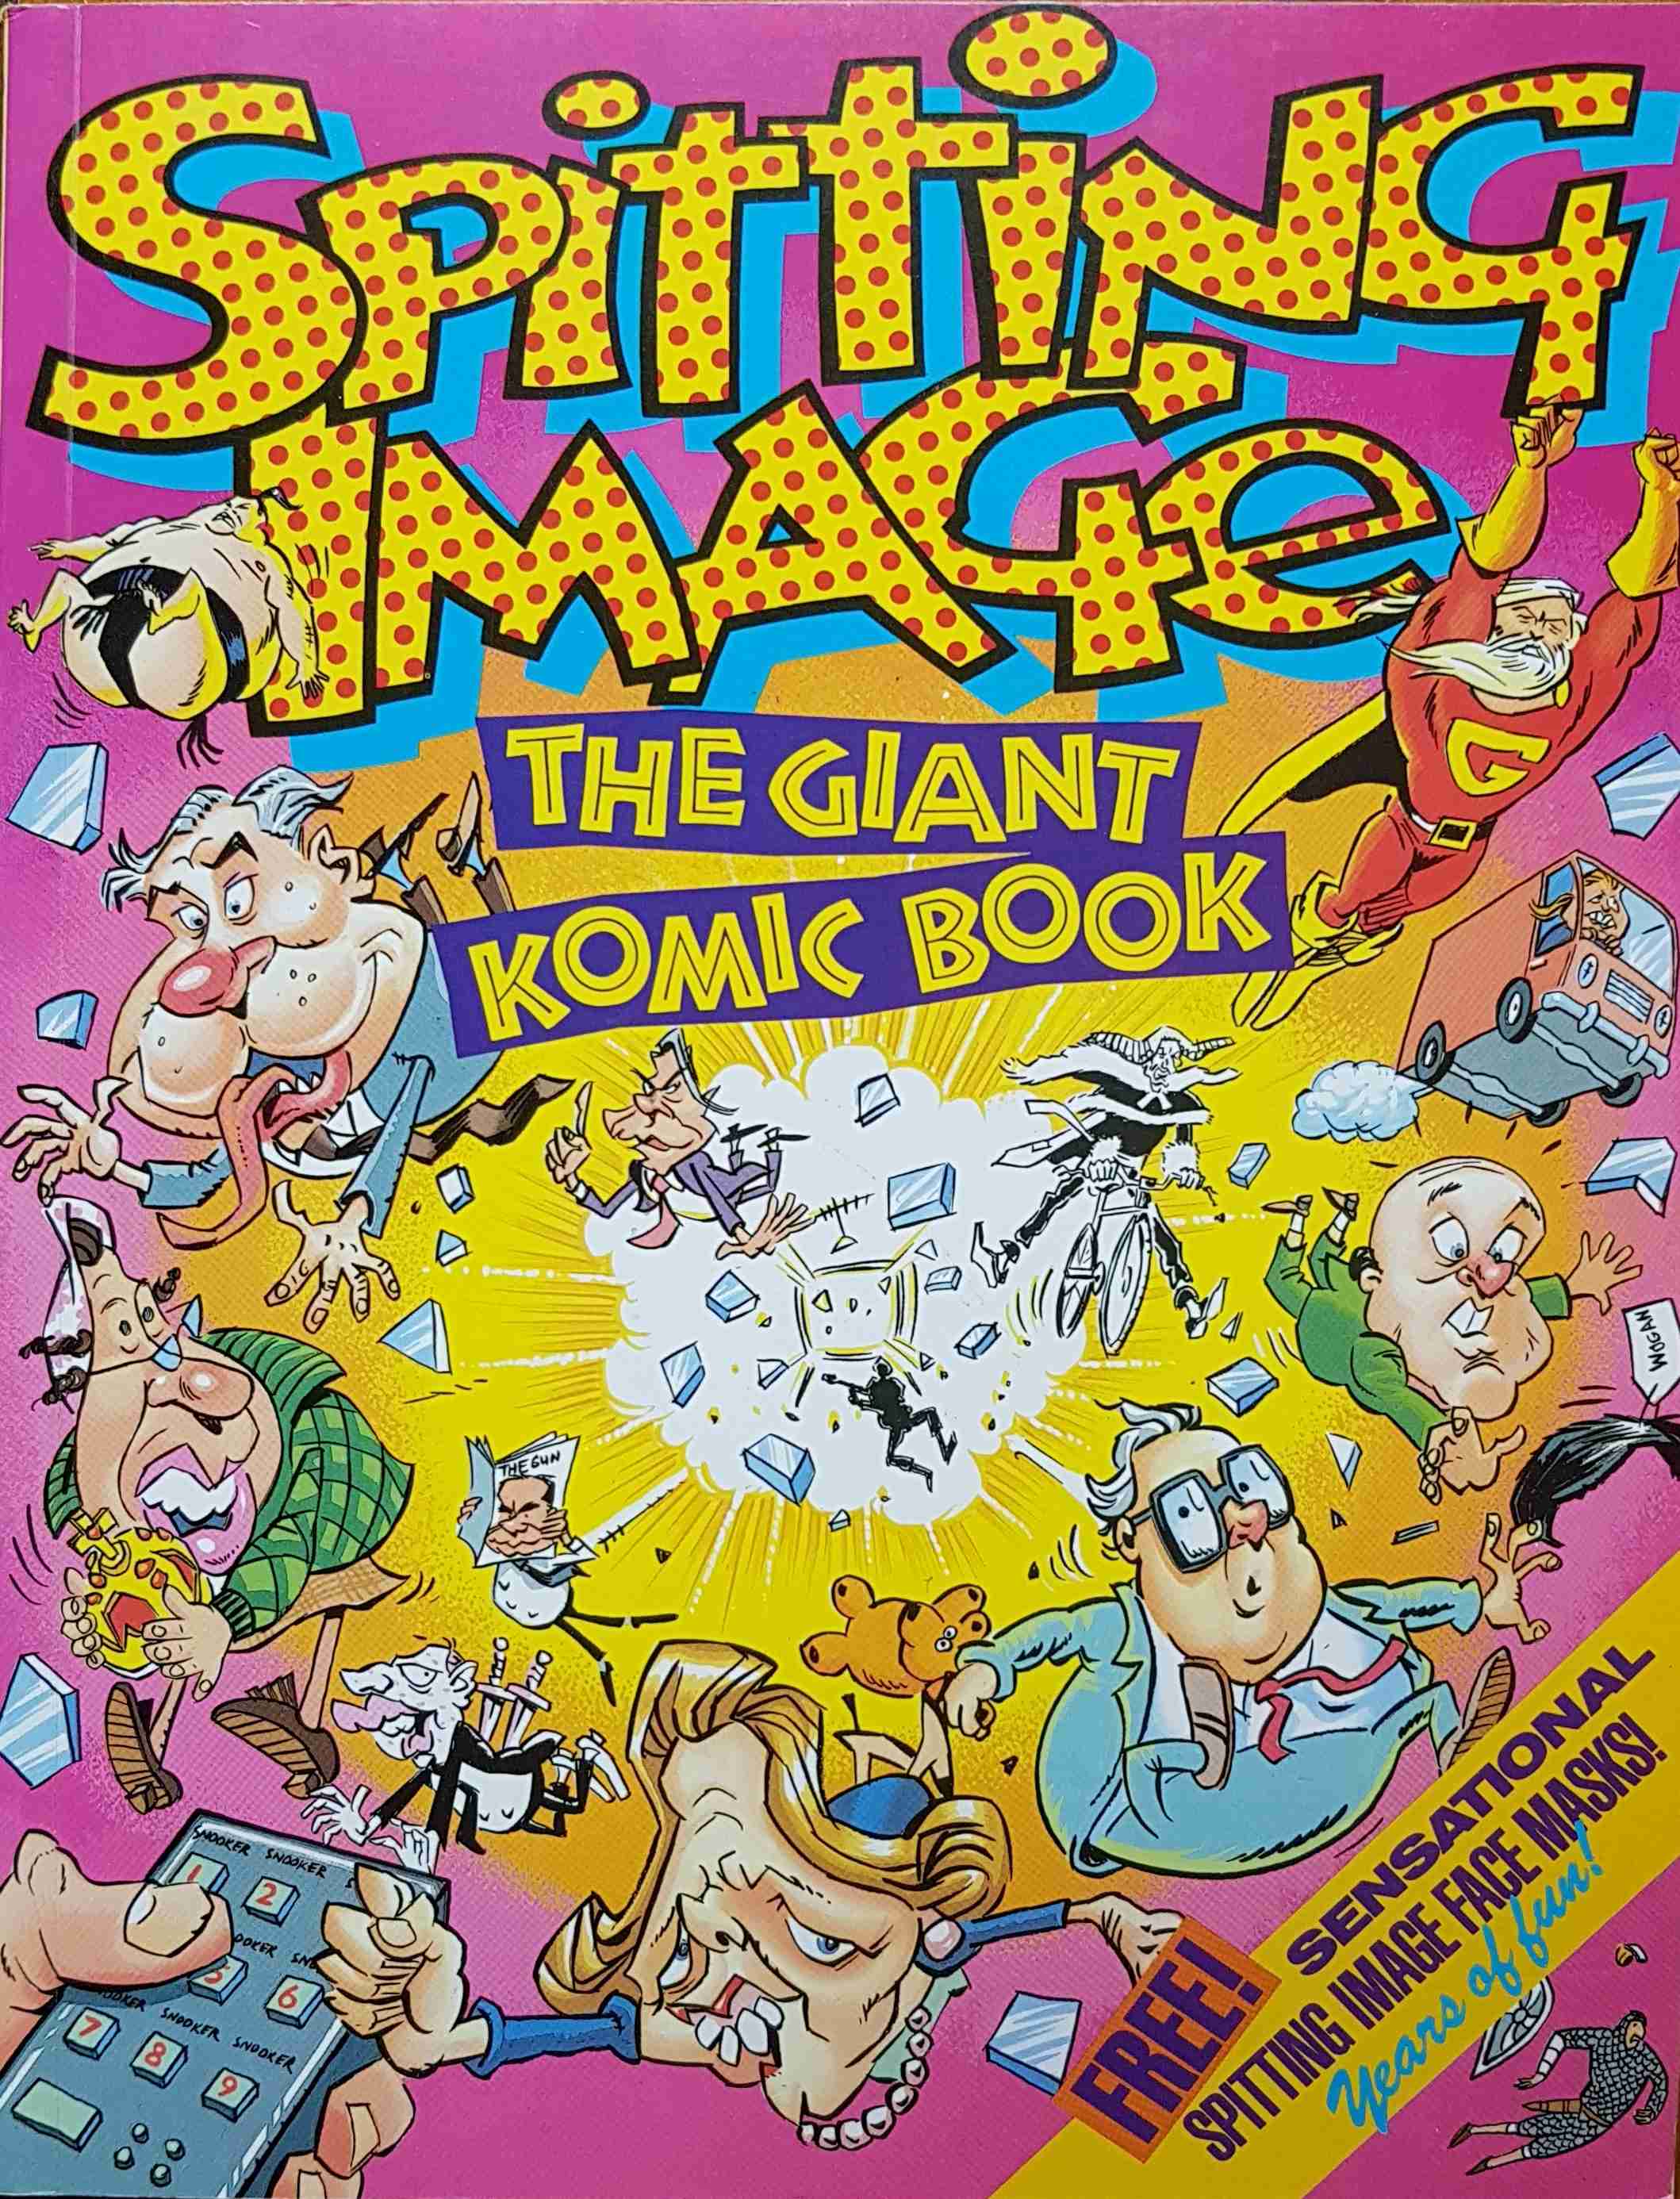 Picture of Spitting image - The giant komic book by artist Various from ITV, Channel 4 and Channel 5 books library